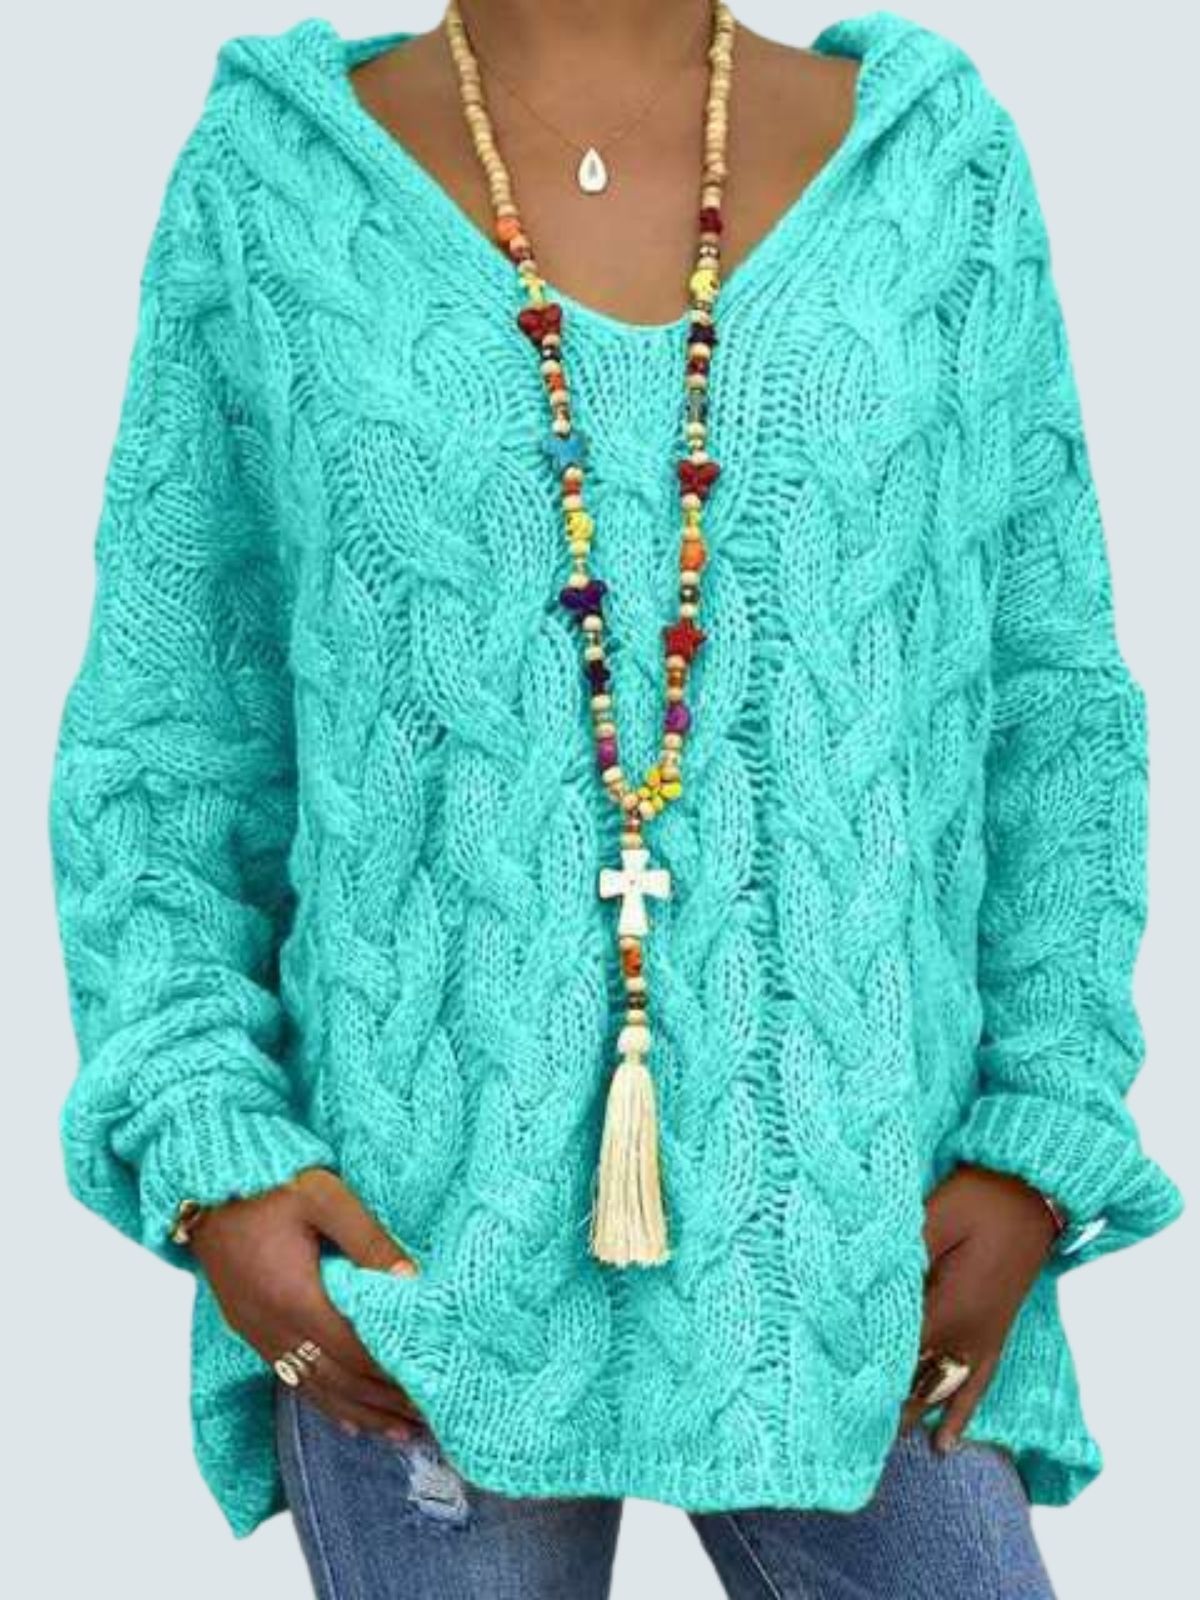 Women's Braid Knit Long Sleeve Hooded Sweater Turquoise